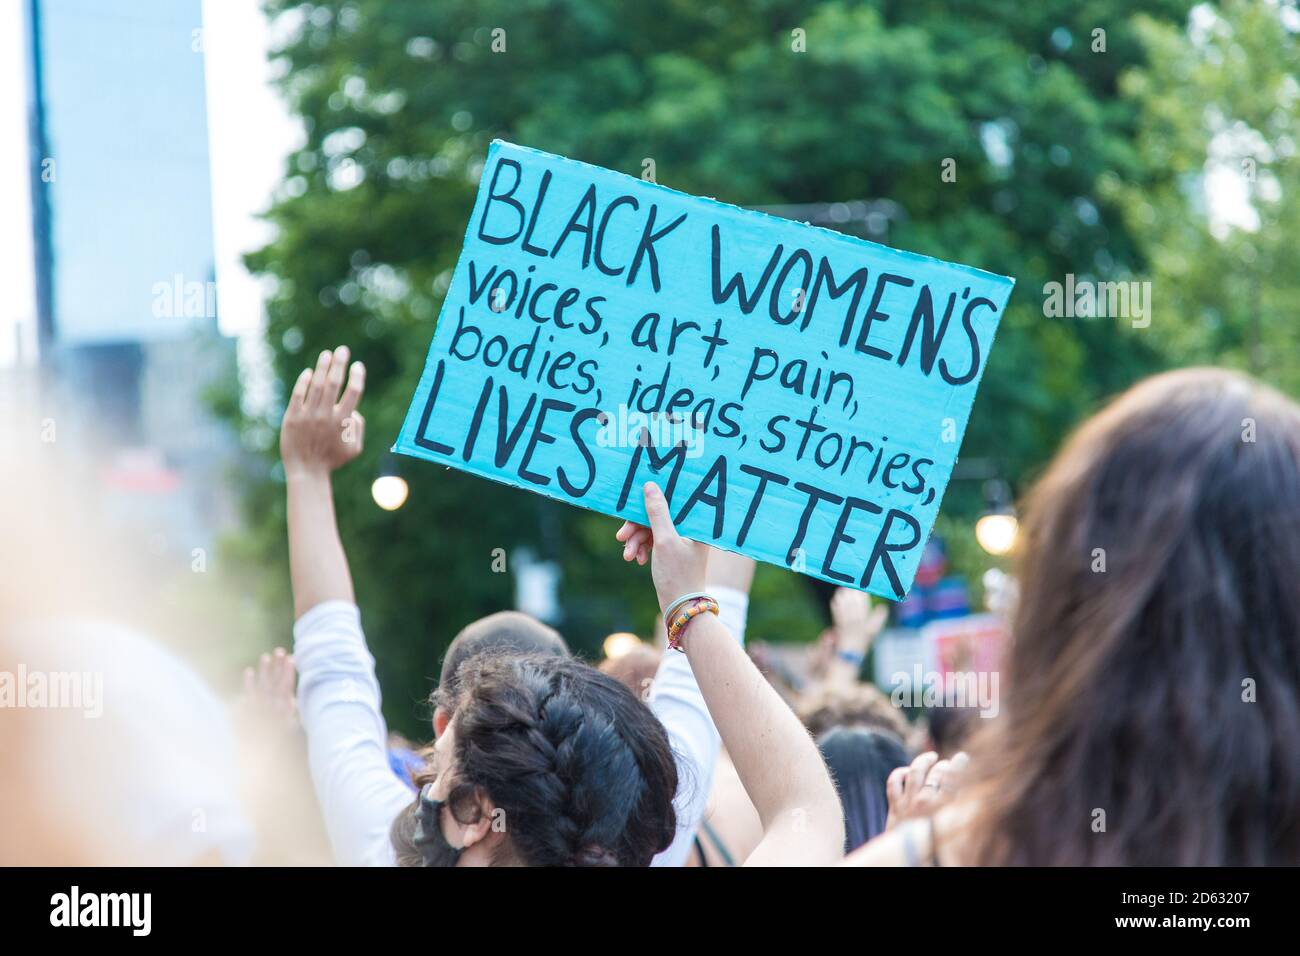 Woman Protester holding Sign, Black Women's Lives Matter, during Juneteenth March, New York City, New York, USA Stock Photo